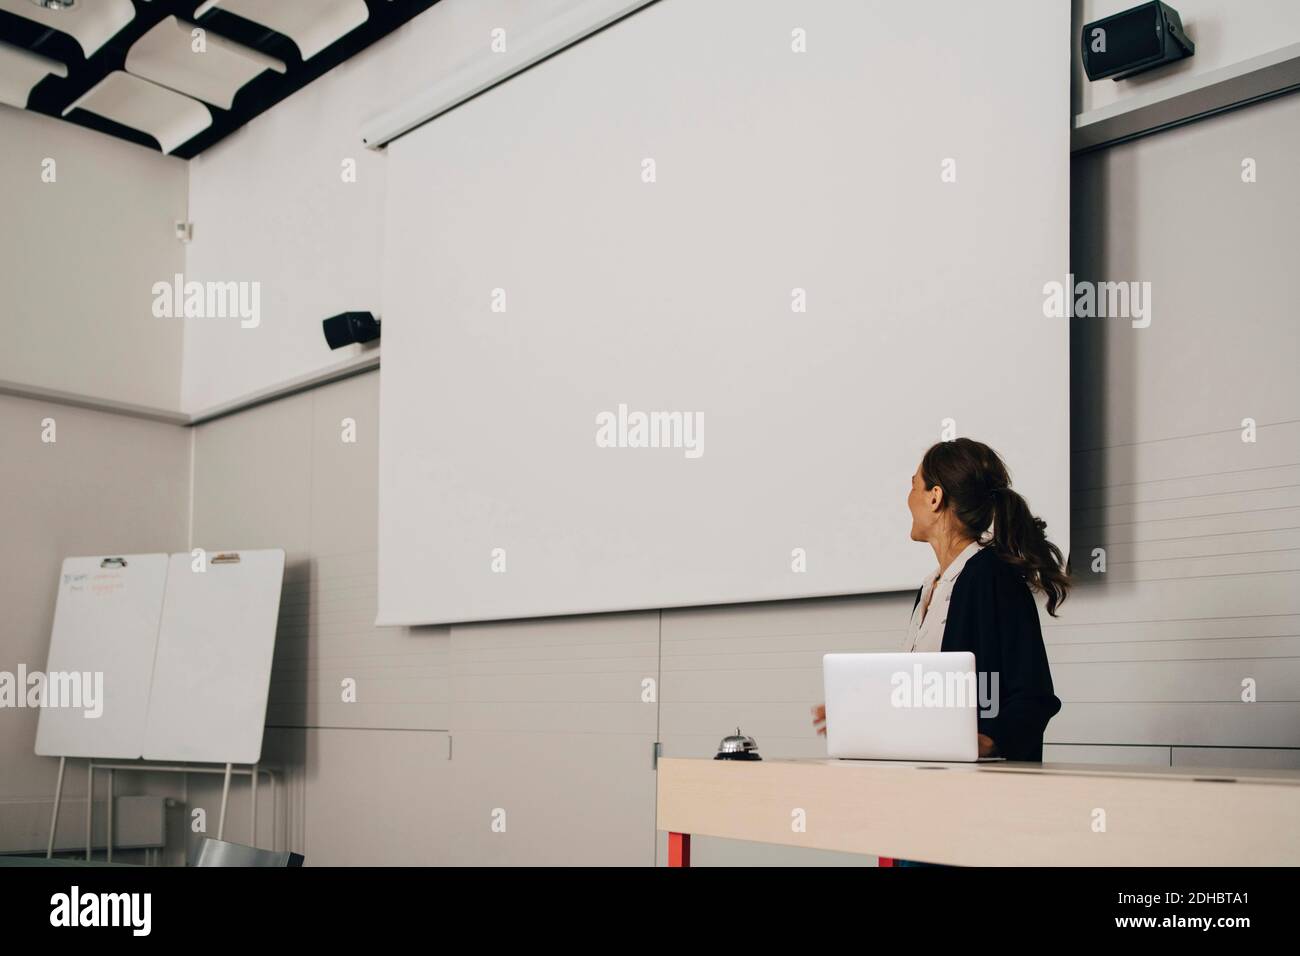 Businesswoman giving presentation while looking at blank projection screen at creative office Stock Photo